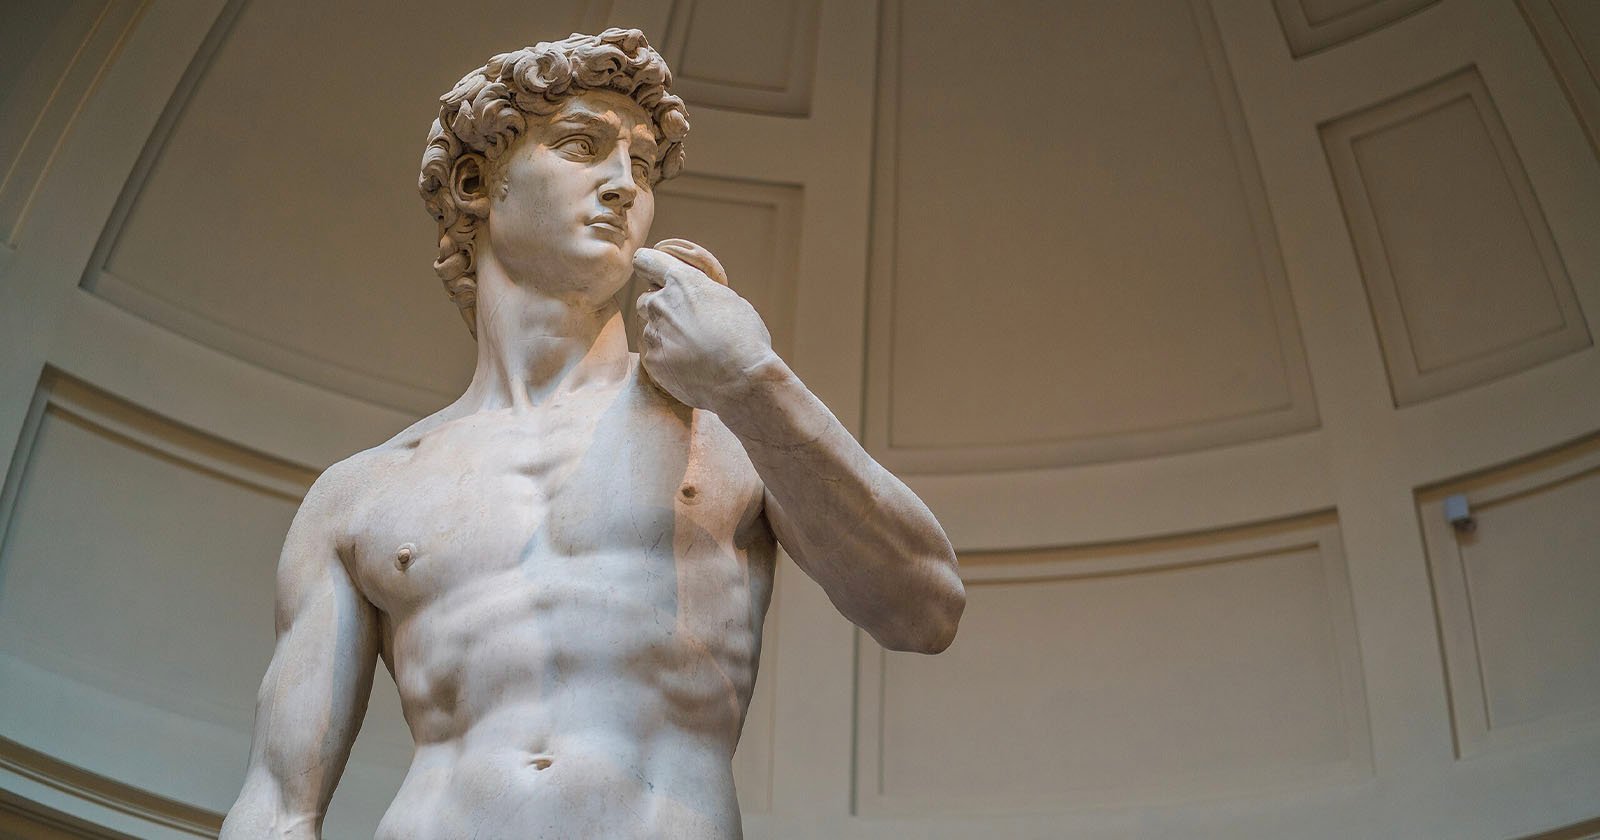 Italian Court Orders Getty Images to Remove Photos of Michelangelos David